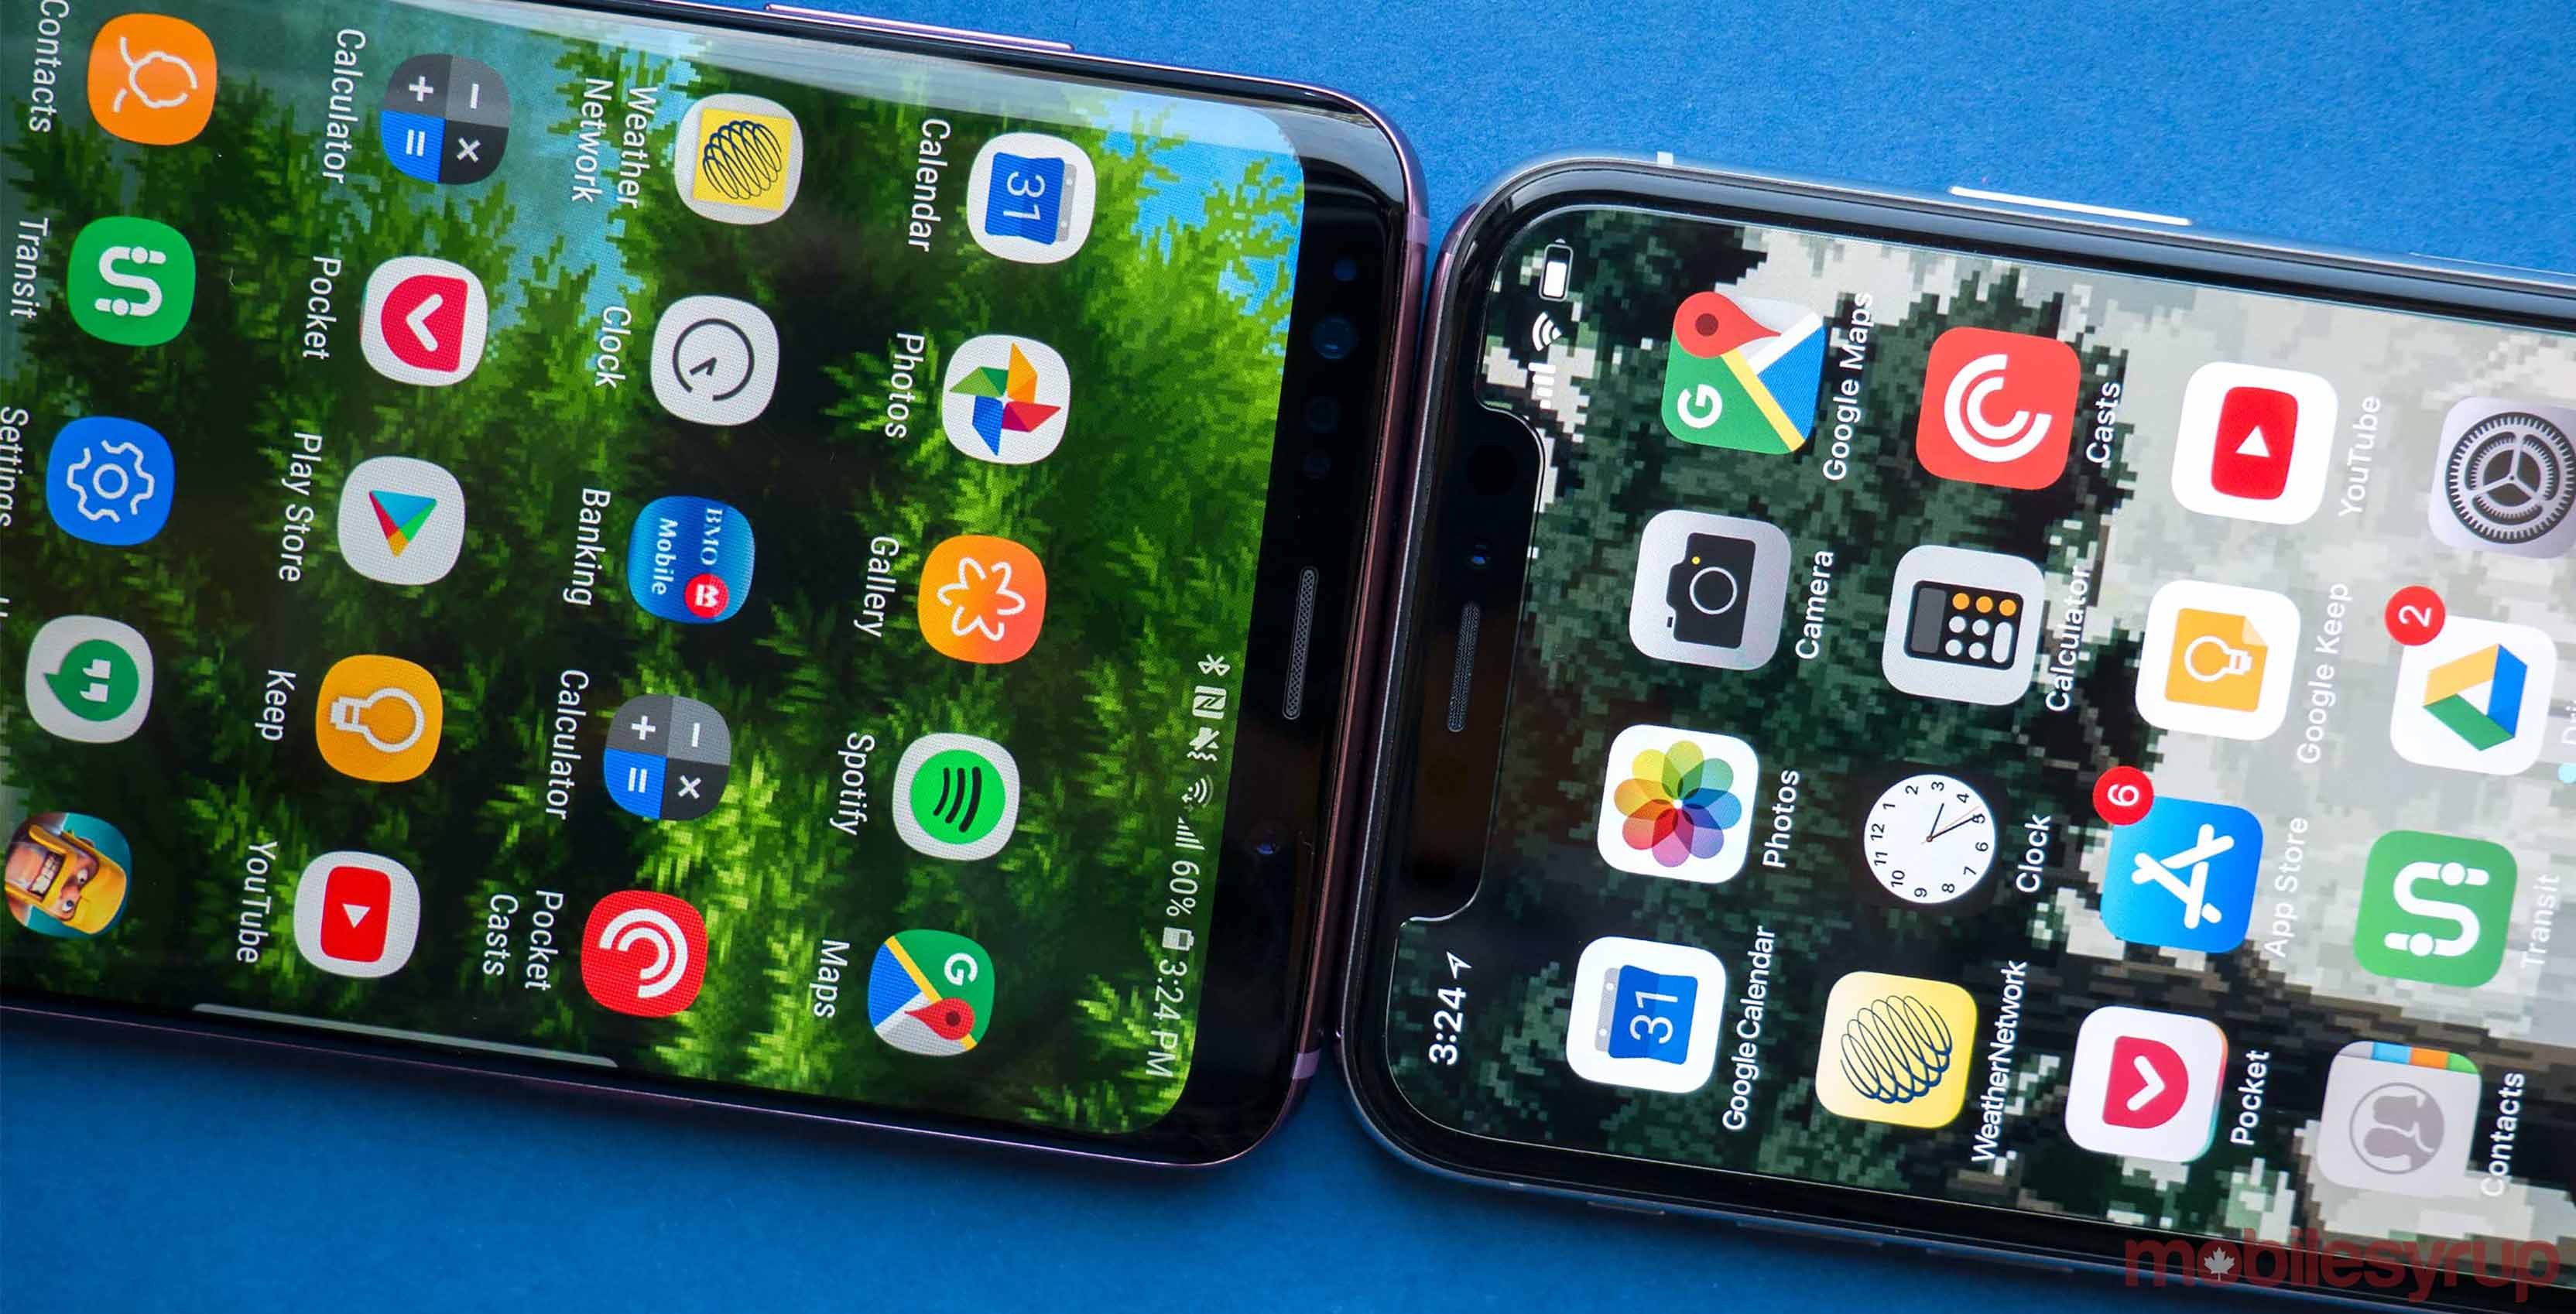 Samsung Galaxy S8 and iPhone X